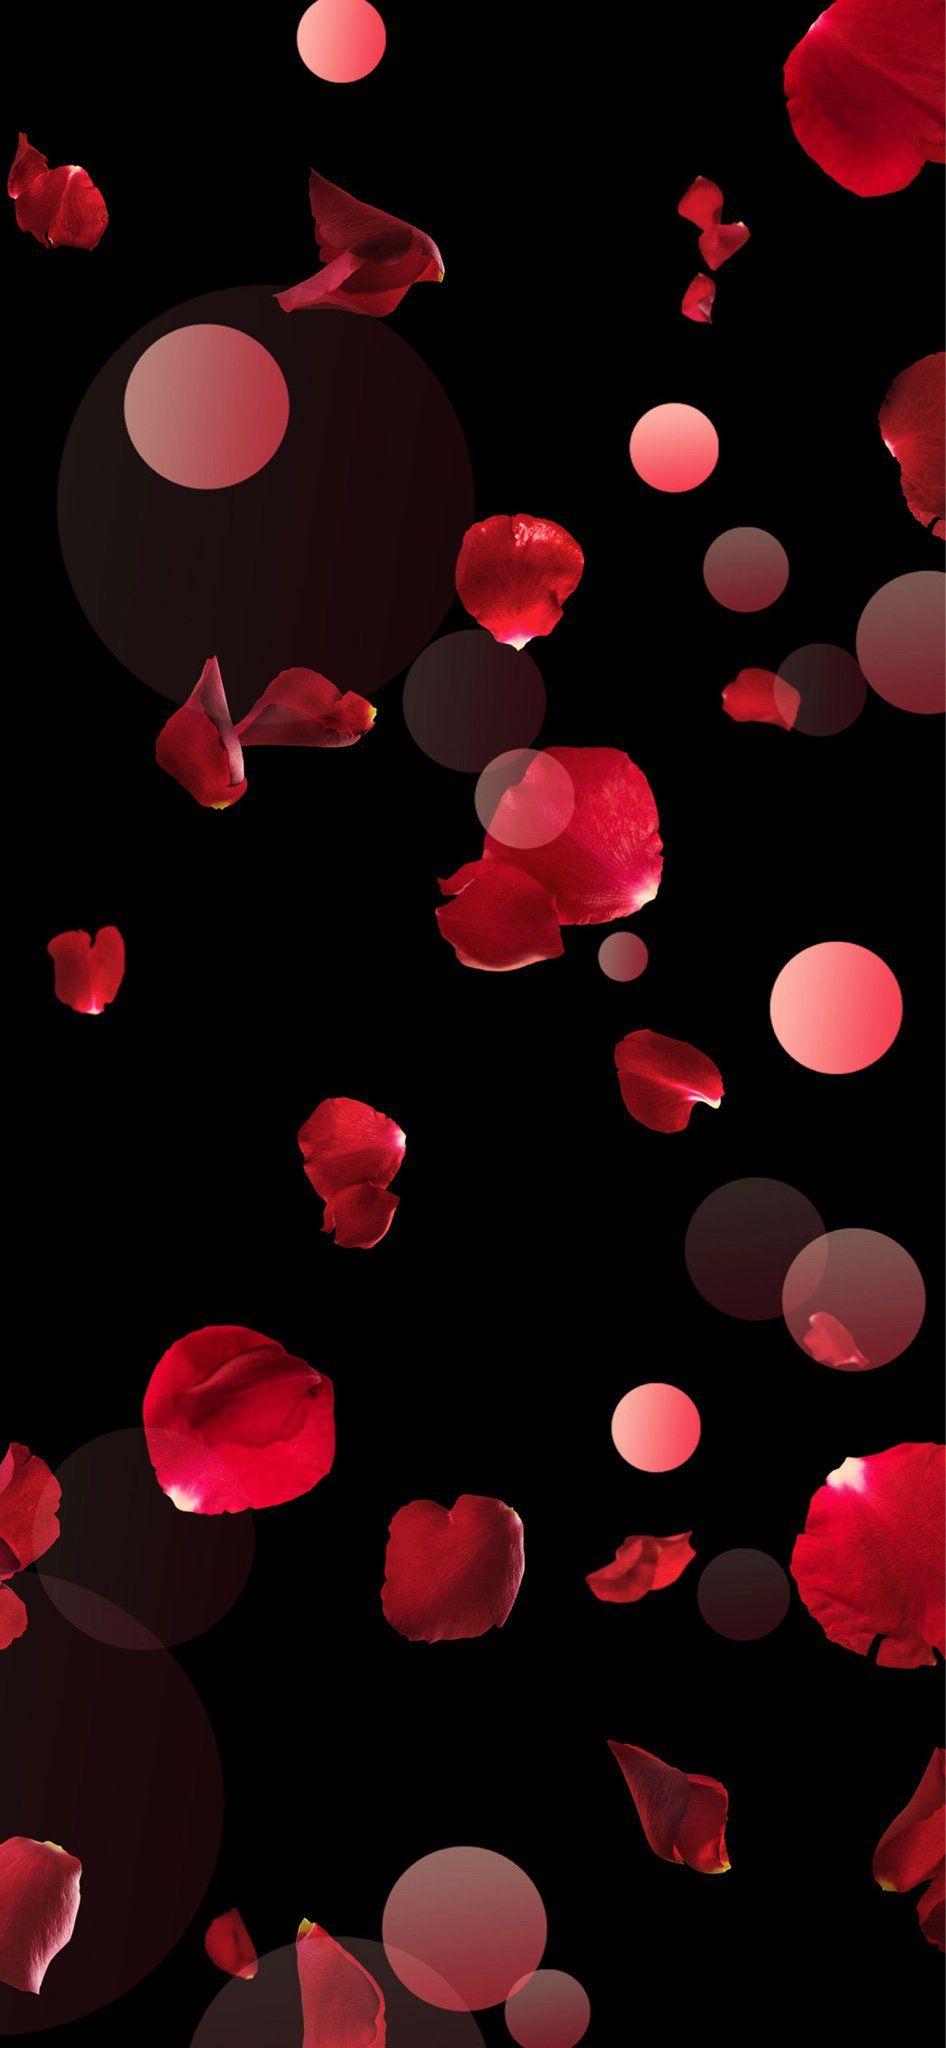 iPhone X. Cellphone wallpaper, Red wallpaper, Colorful wallpaper